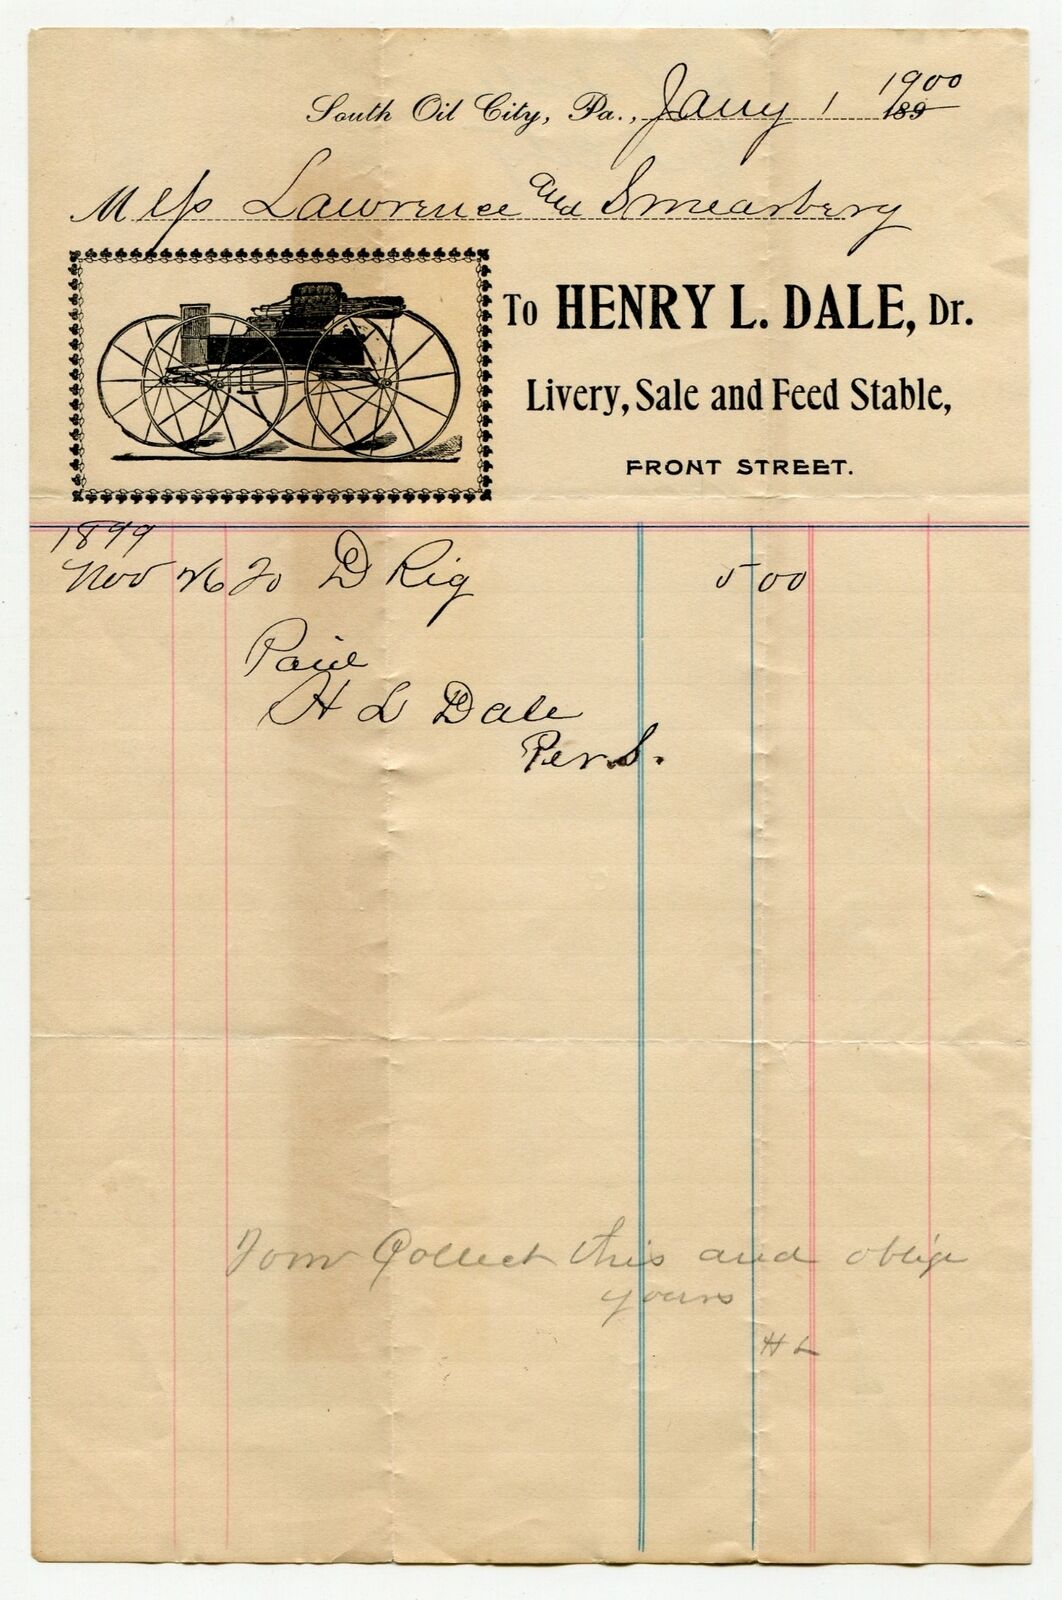 1900 Billhead South Oil City Pennsylvania Henry L. Dale Livery Sale Feed Stable